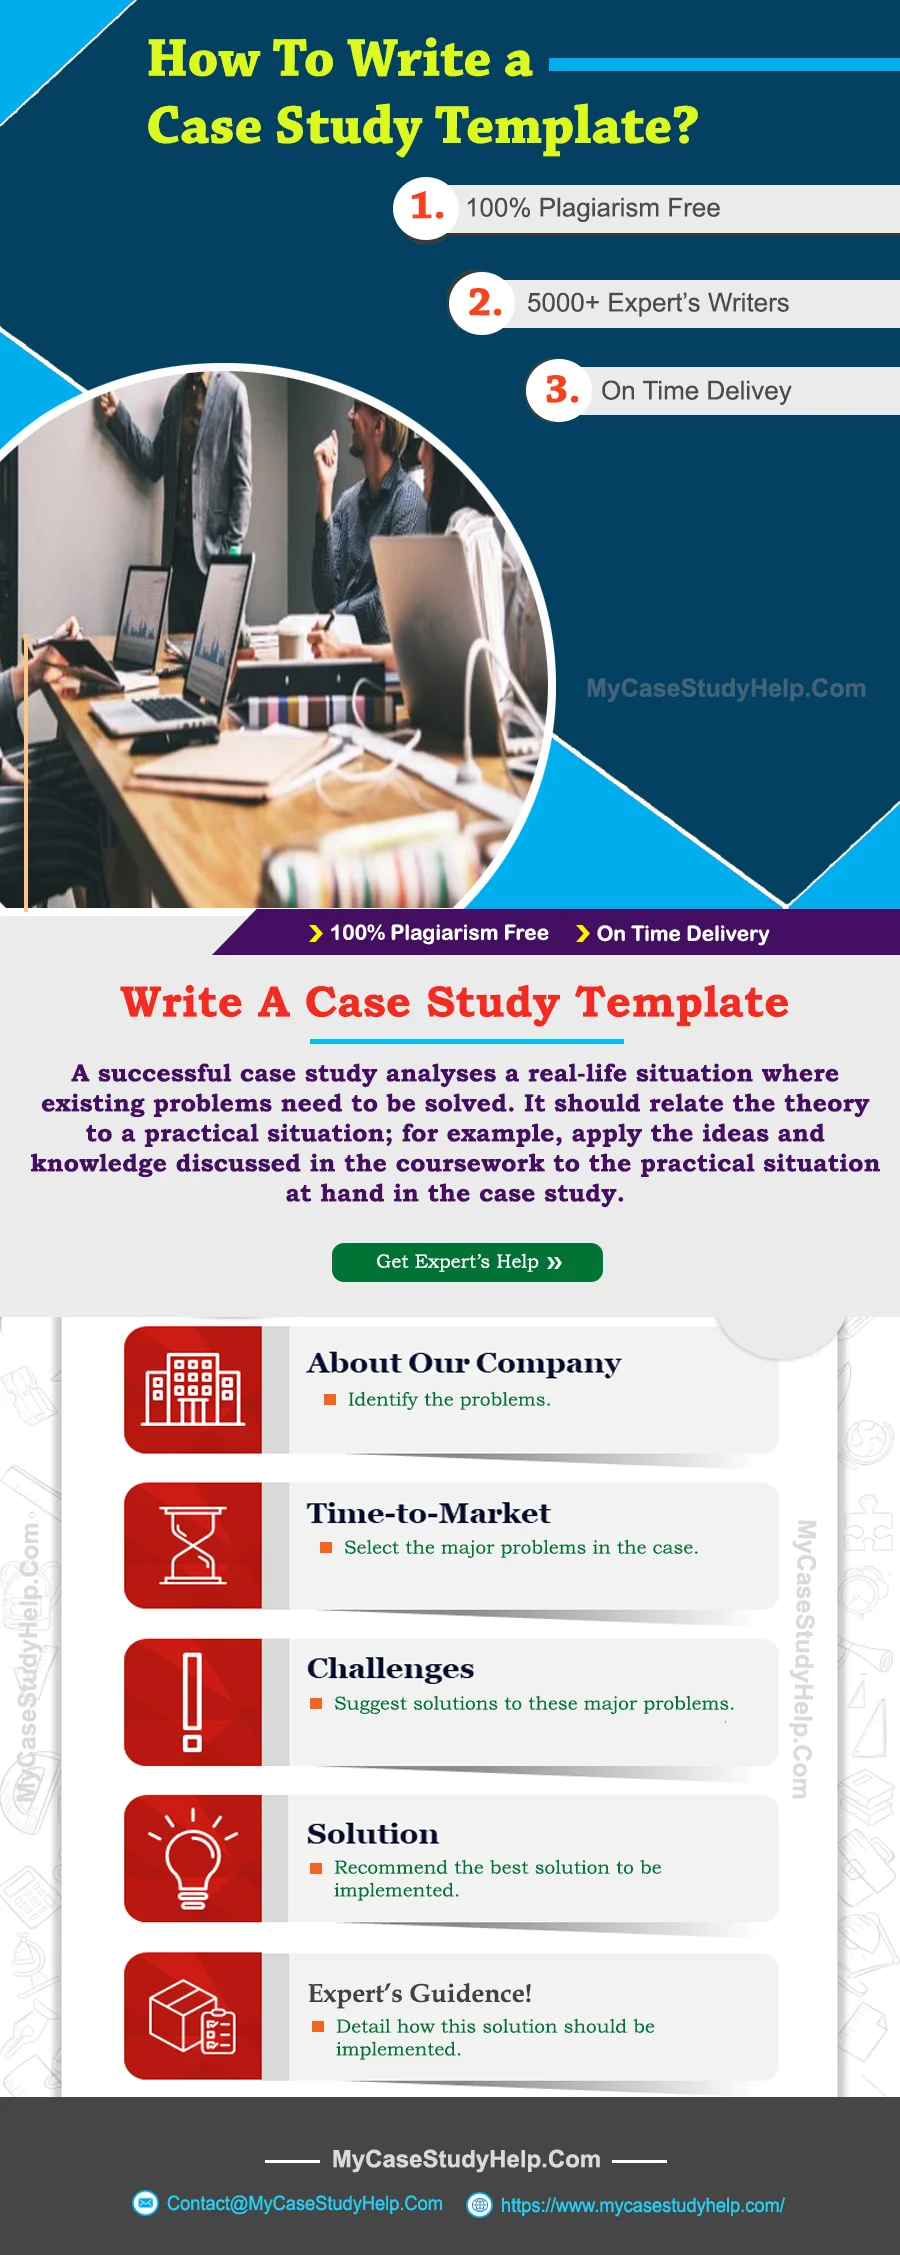 How To Write A Case Study Template